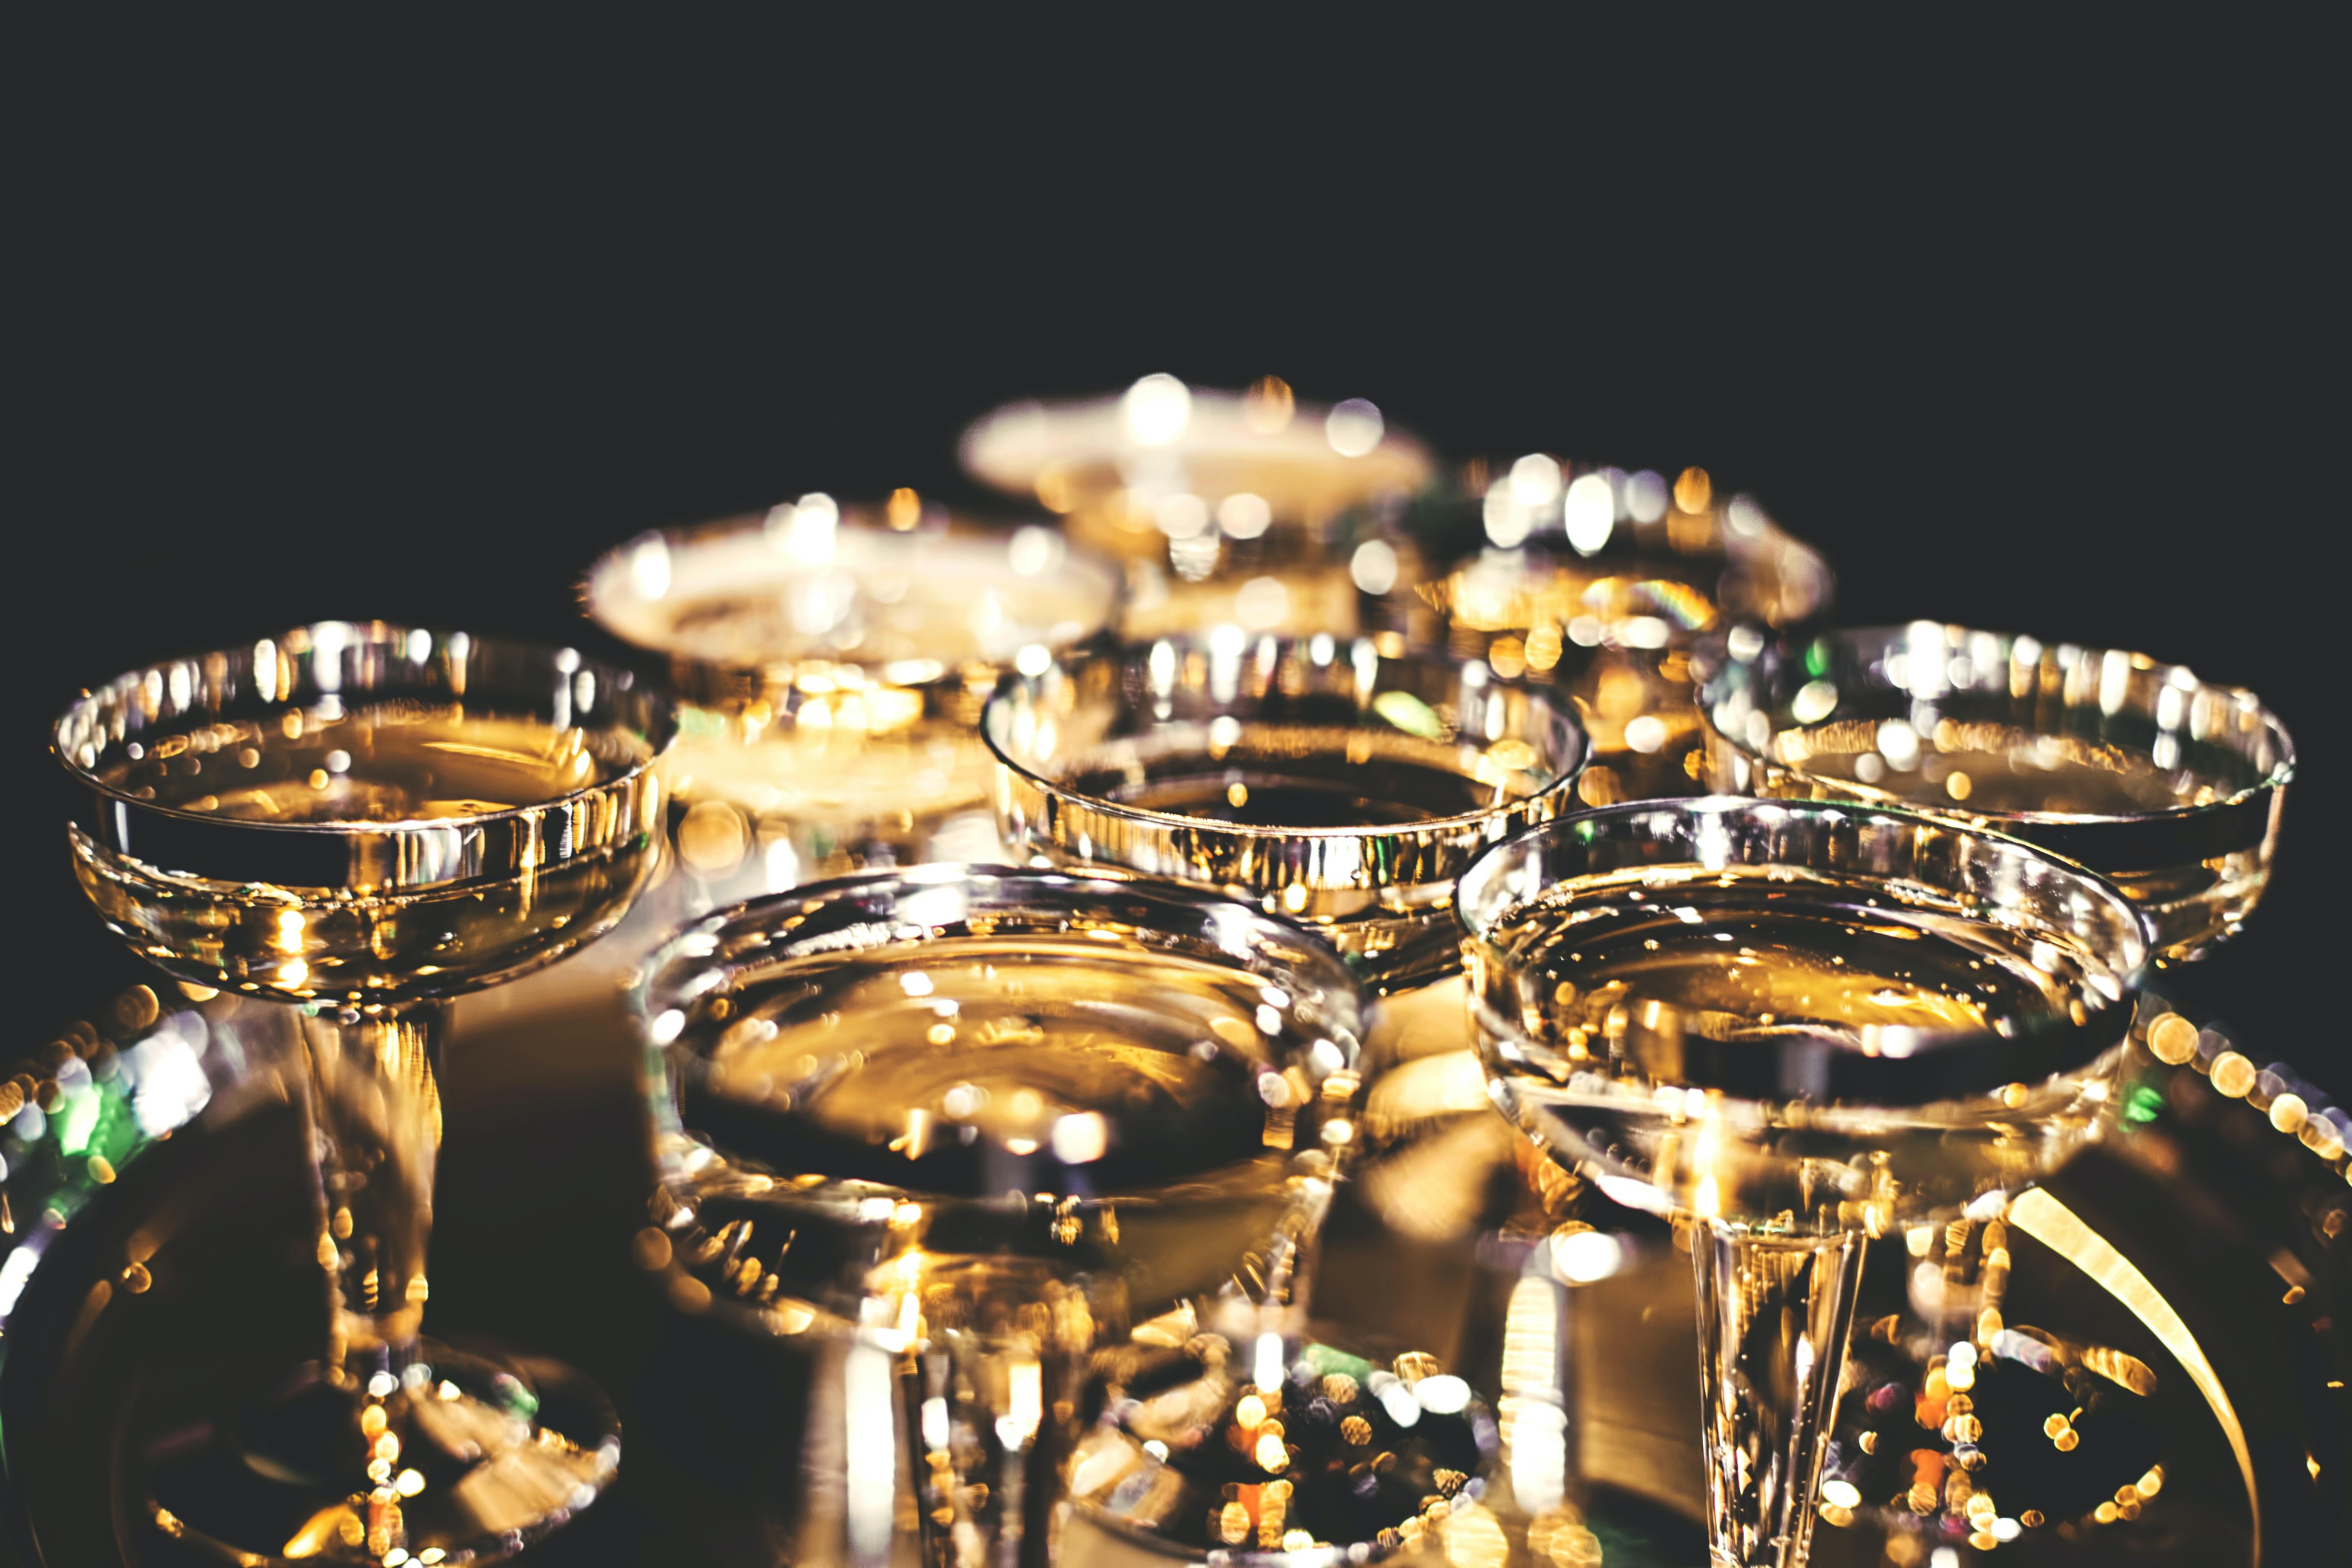 Tray of gold drinking glasses